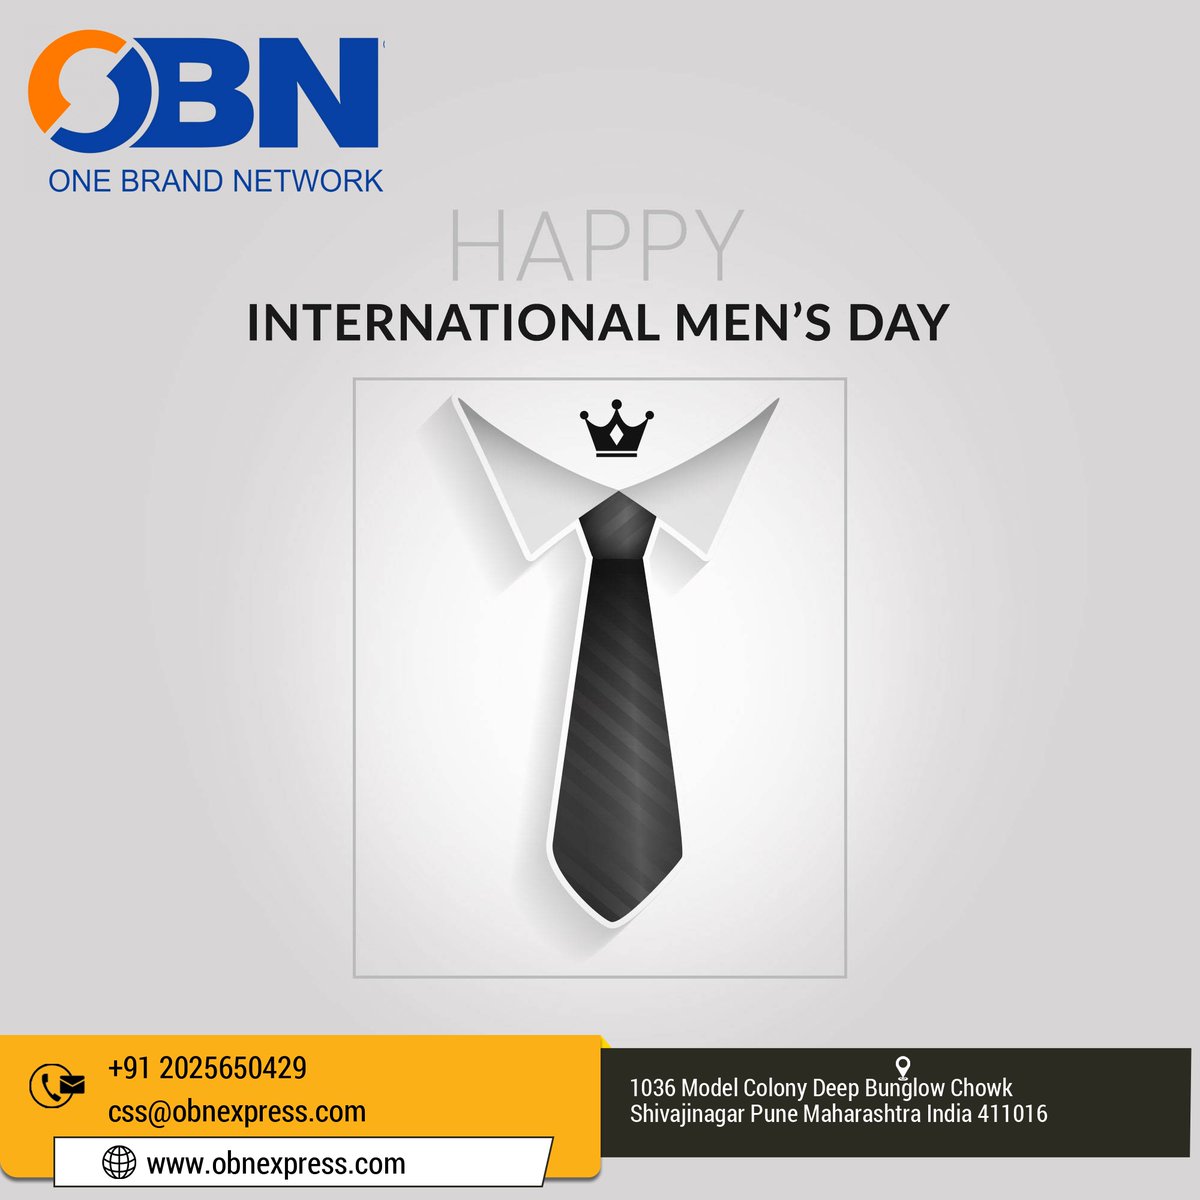 The beauty of all men is that each has a special quality, and it is incredible when you discover their true heart. Happy #InternationalMen'sDay!

#MensDay #trueheart  #obnexpress

https://t.co/8YkBNic9iI https://t.co/ZuLz7x6eDO